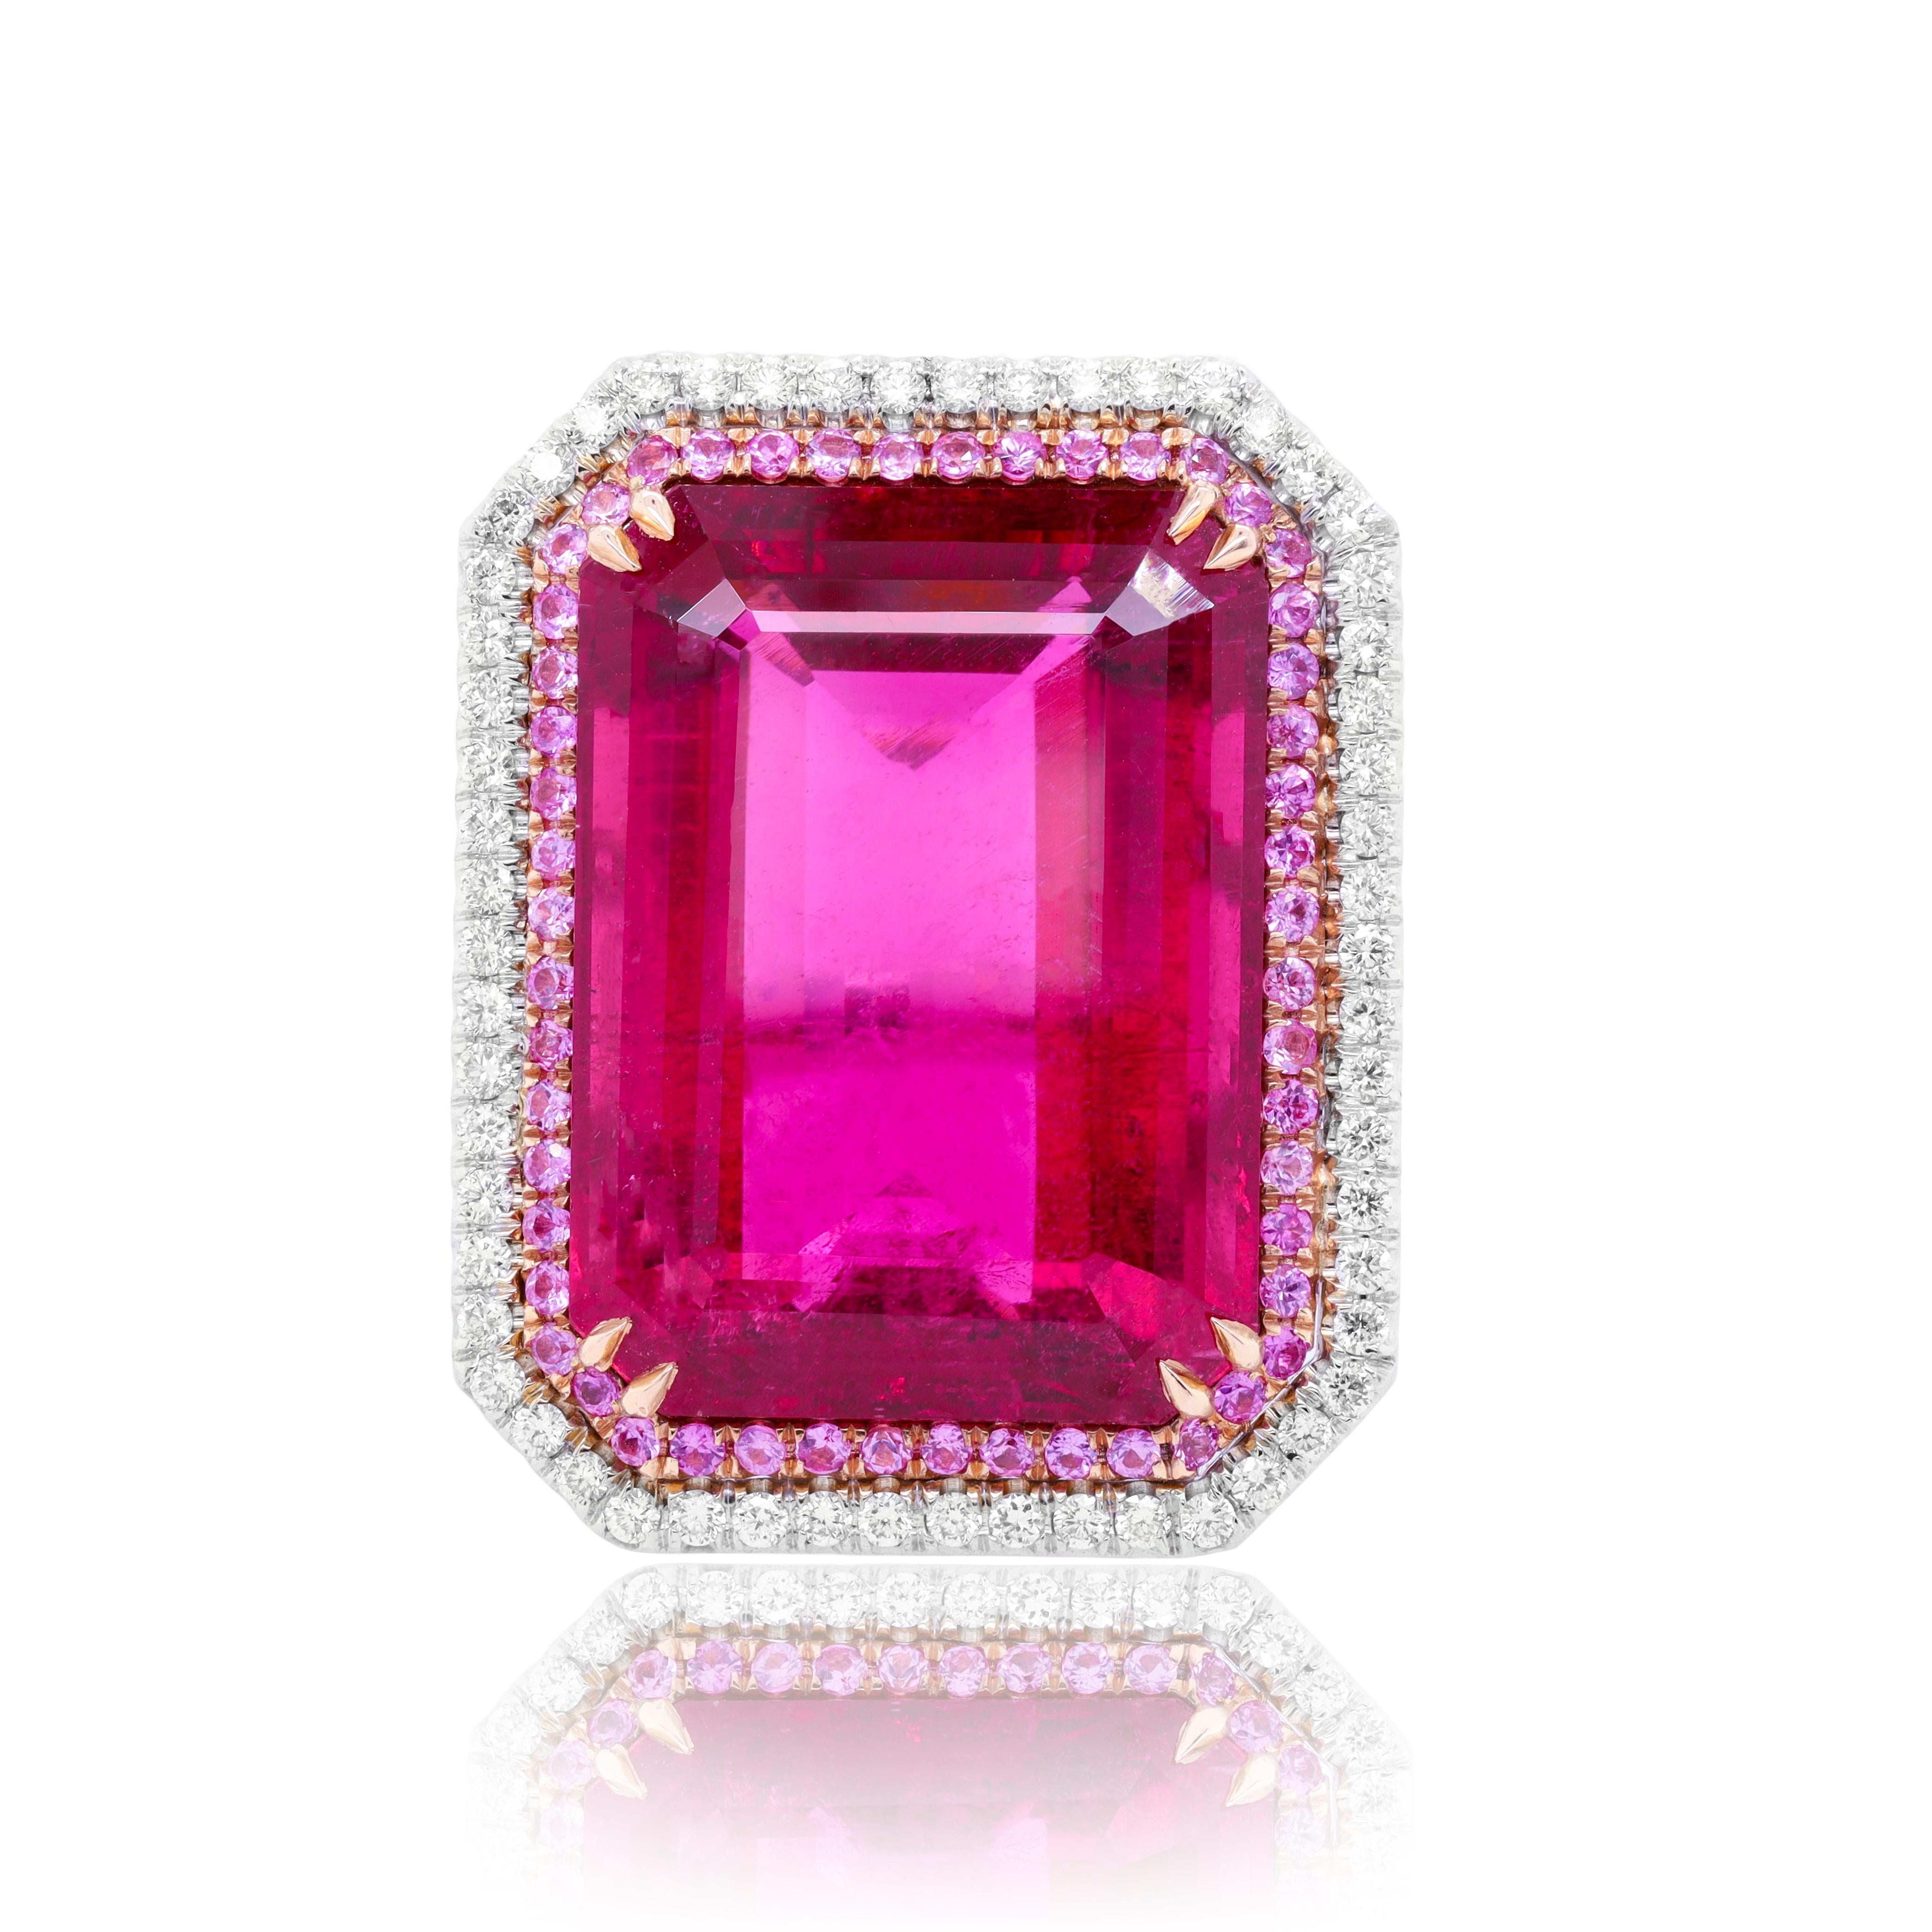 18kt White Gold Pink Tourmaline Diamond Ring With 25.93ct Of Pink Tourmaline Set In Double Halo Setting With .60ct Of Pink Sapphires And 1.00ct Of Micropave Diamonds.
